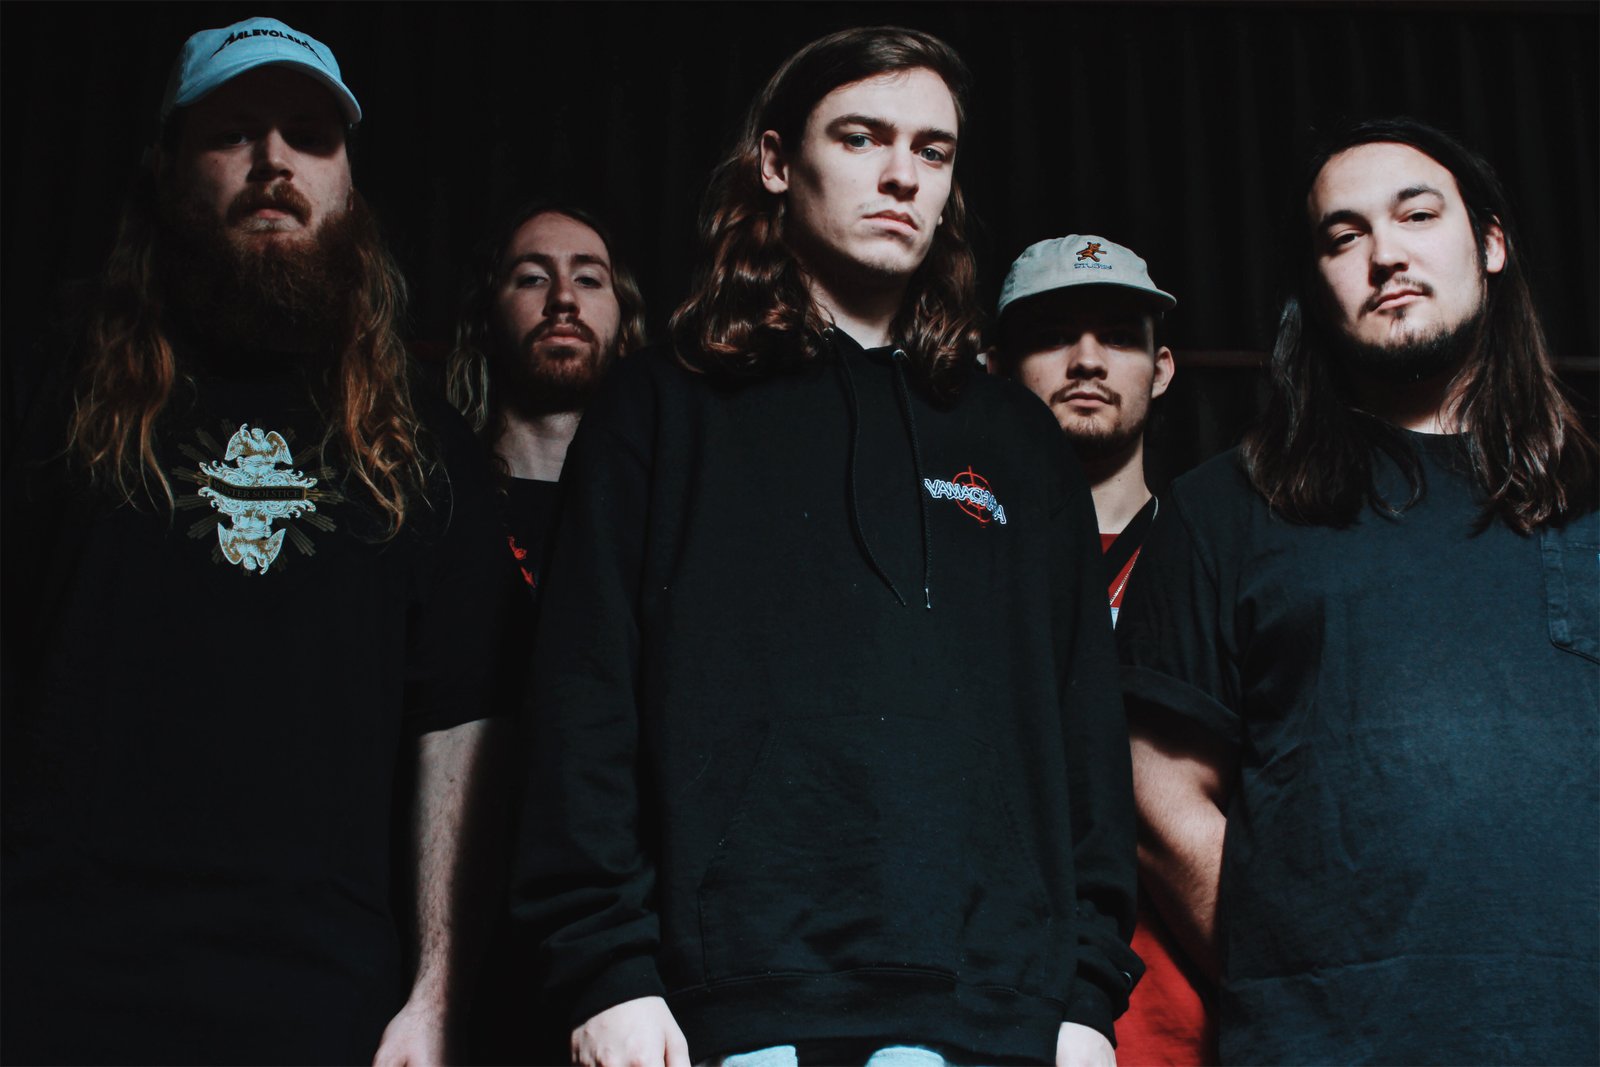 Knocked Loose Announce New Album with Lead Single “…And Still I Wander South”